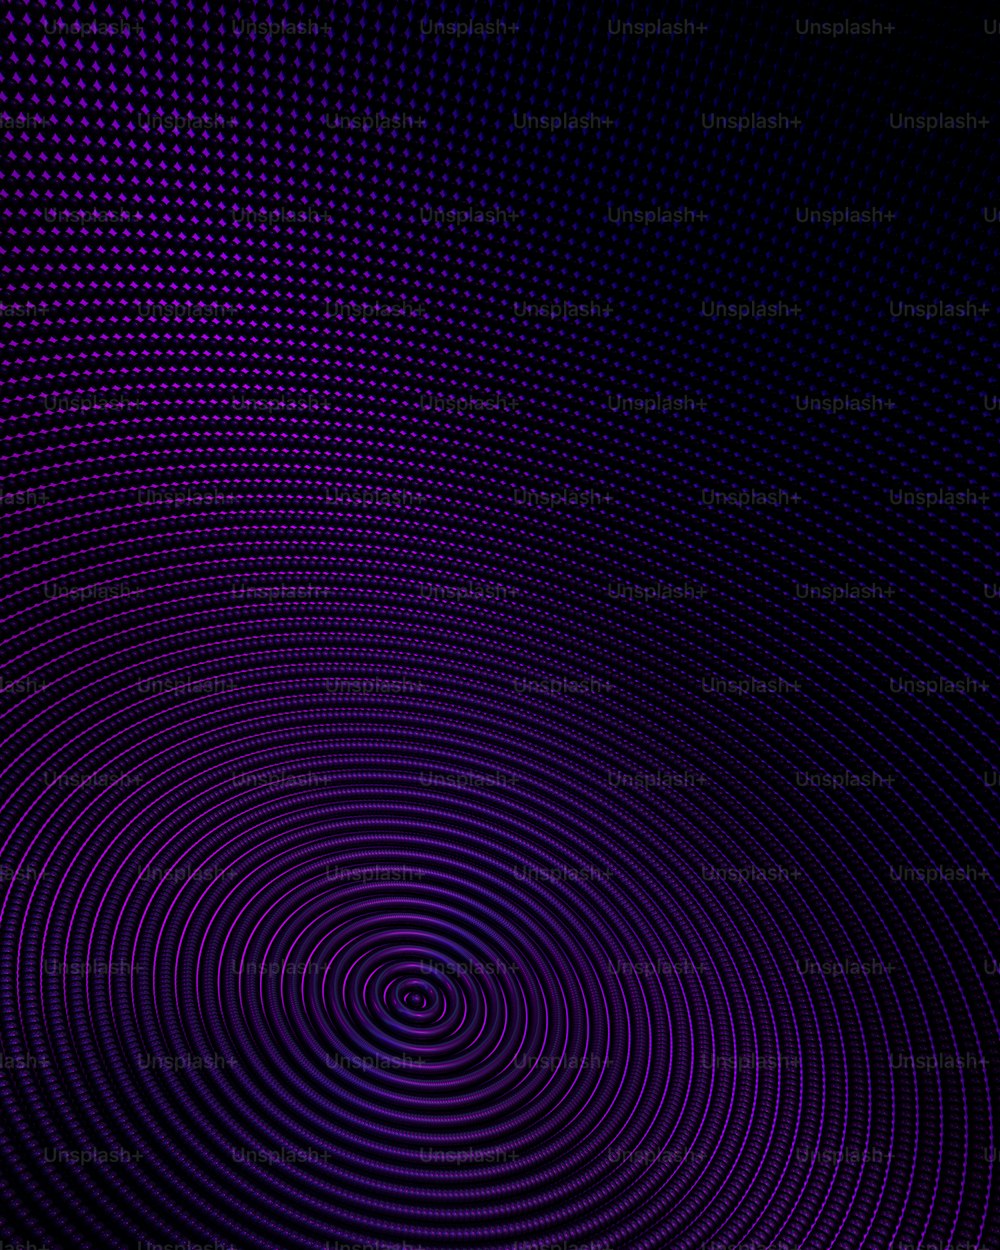 a purple background with a circular design in the center